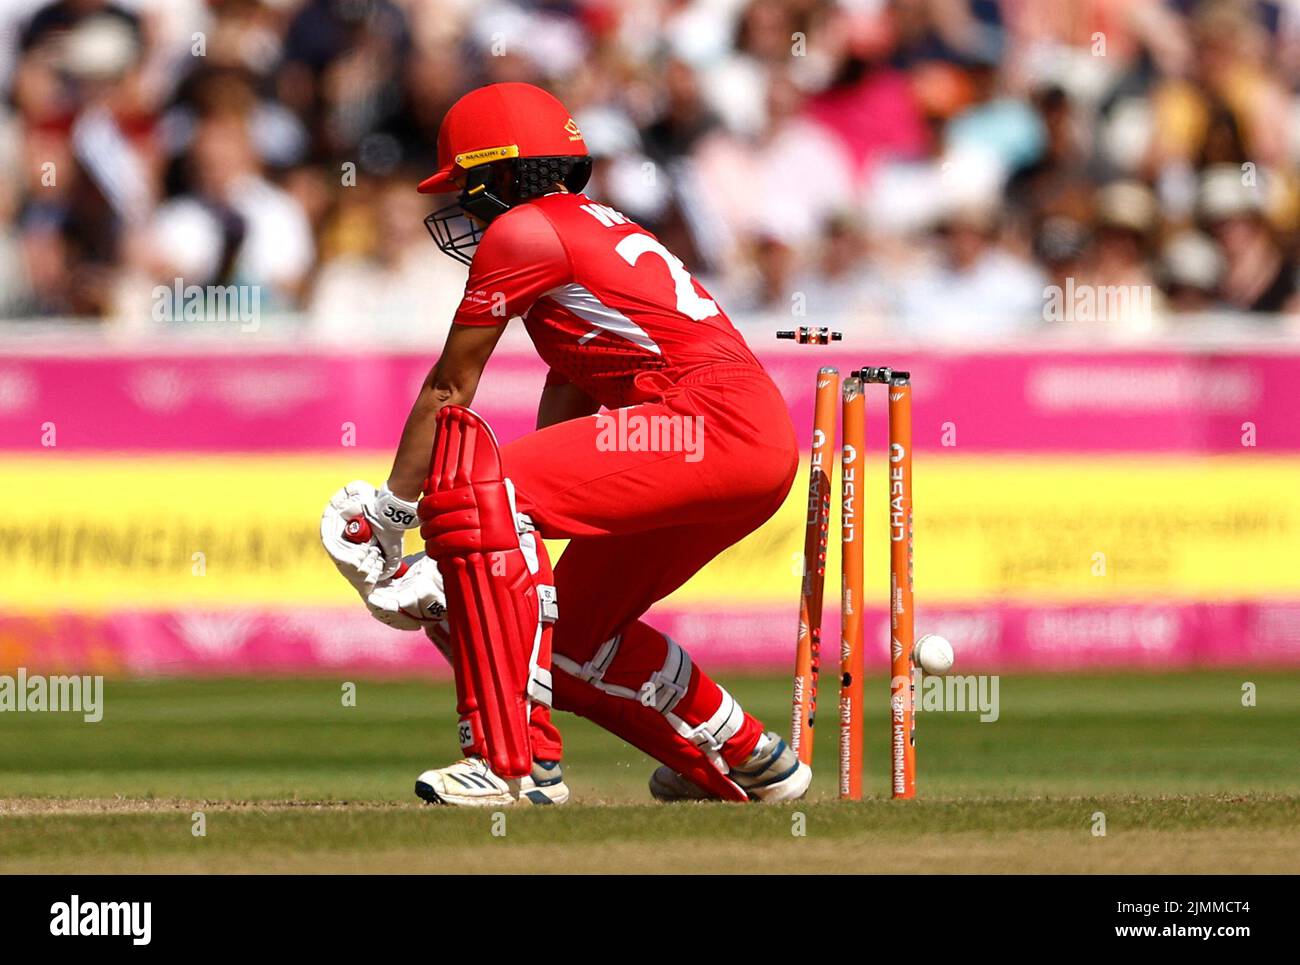 Commonwealth Games - Women's Cricket T20 - England v New Zealand - Bronze Medal - Edgbaston Stadium, Britain - August 7, 2022 England's Issy Wong is bowled out by New Zealand's Hayley Jensen REUTERS/Jason Cairnduff Stock Photo